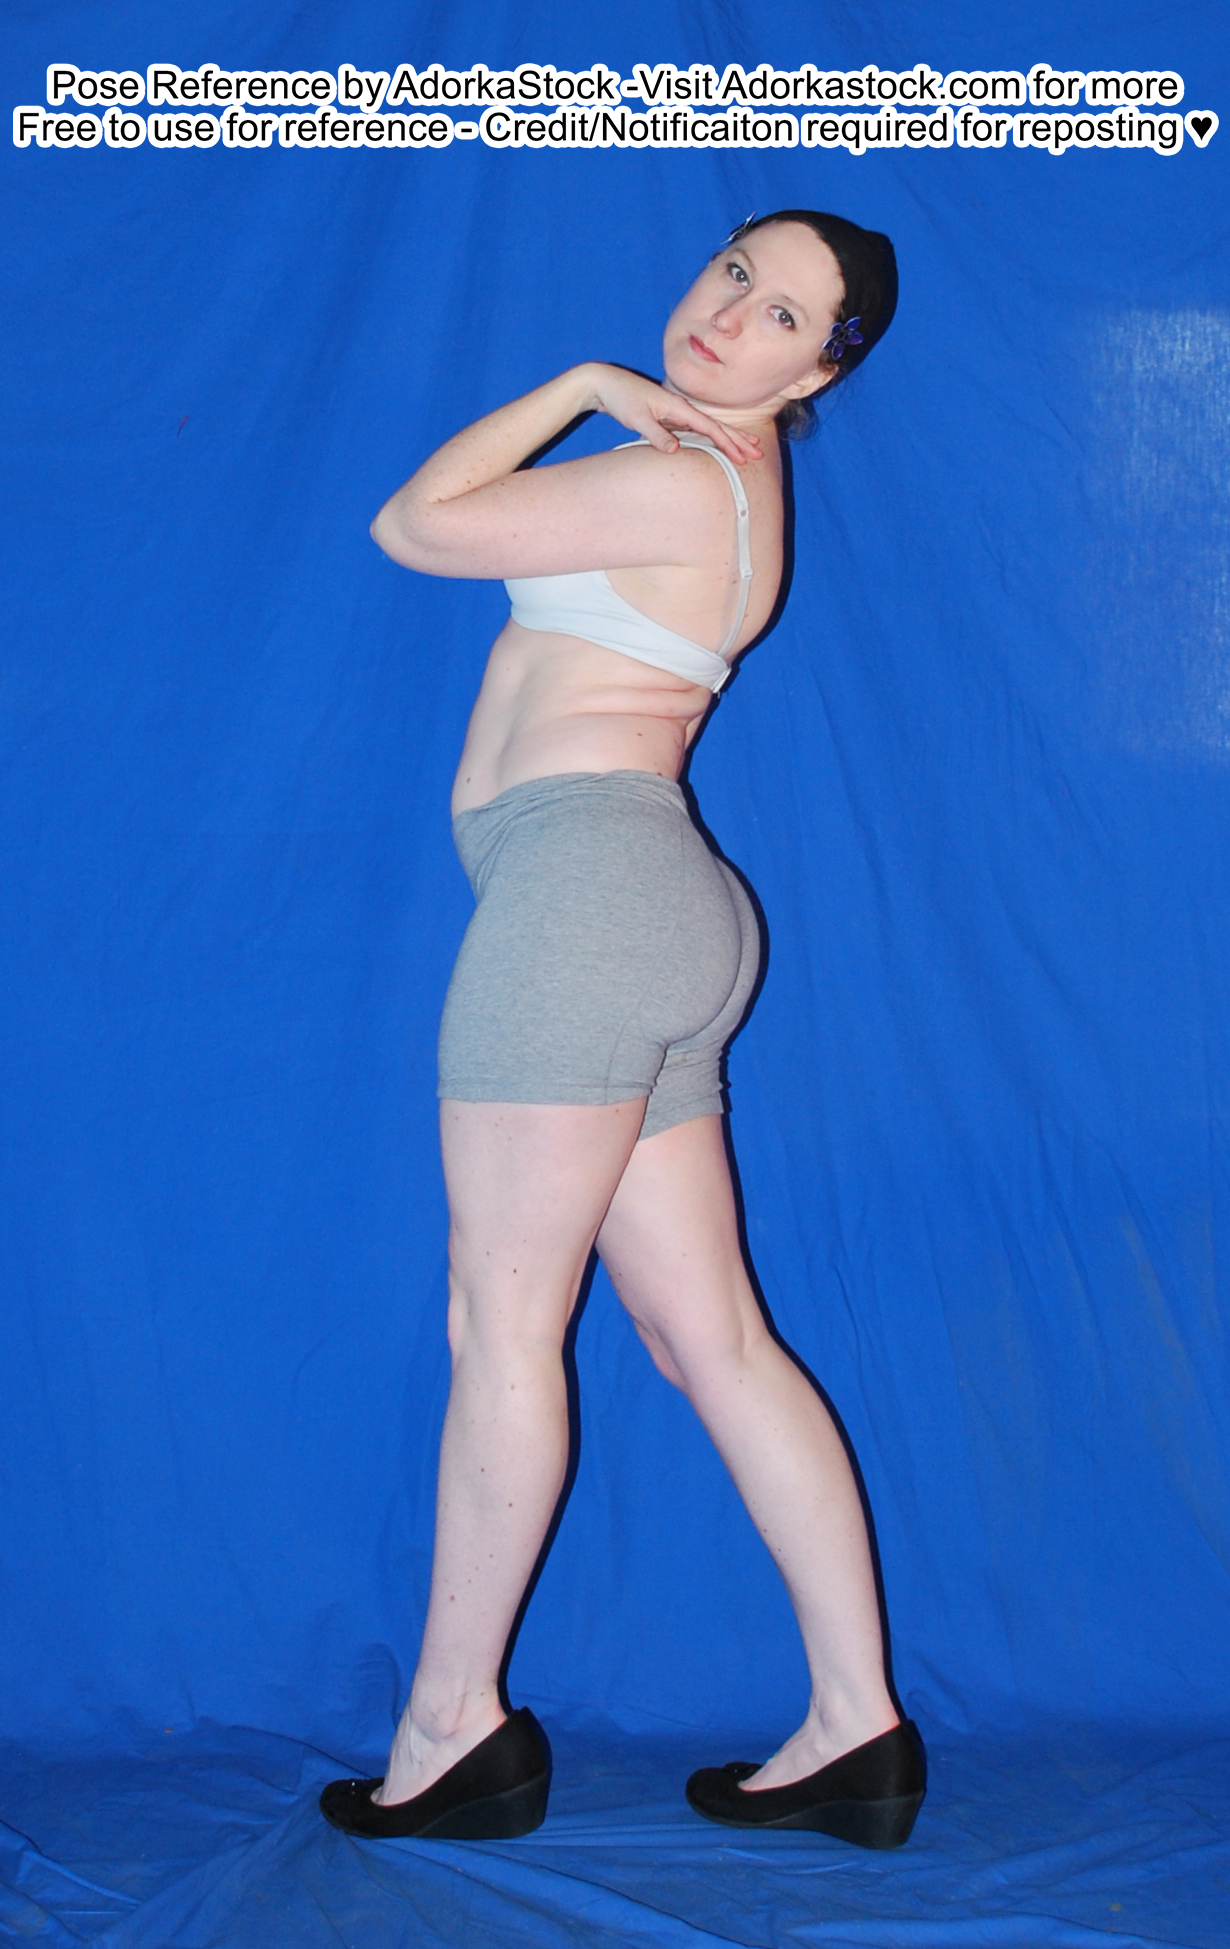 Thin, white, female pose reference model in standing profile pose with one hand up by her face, looking over her shoulder at the camera.